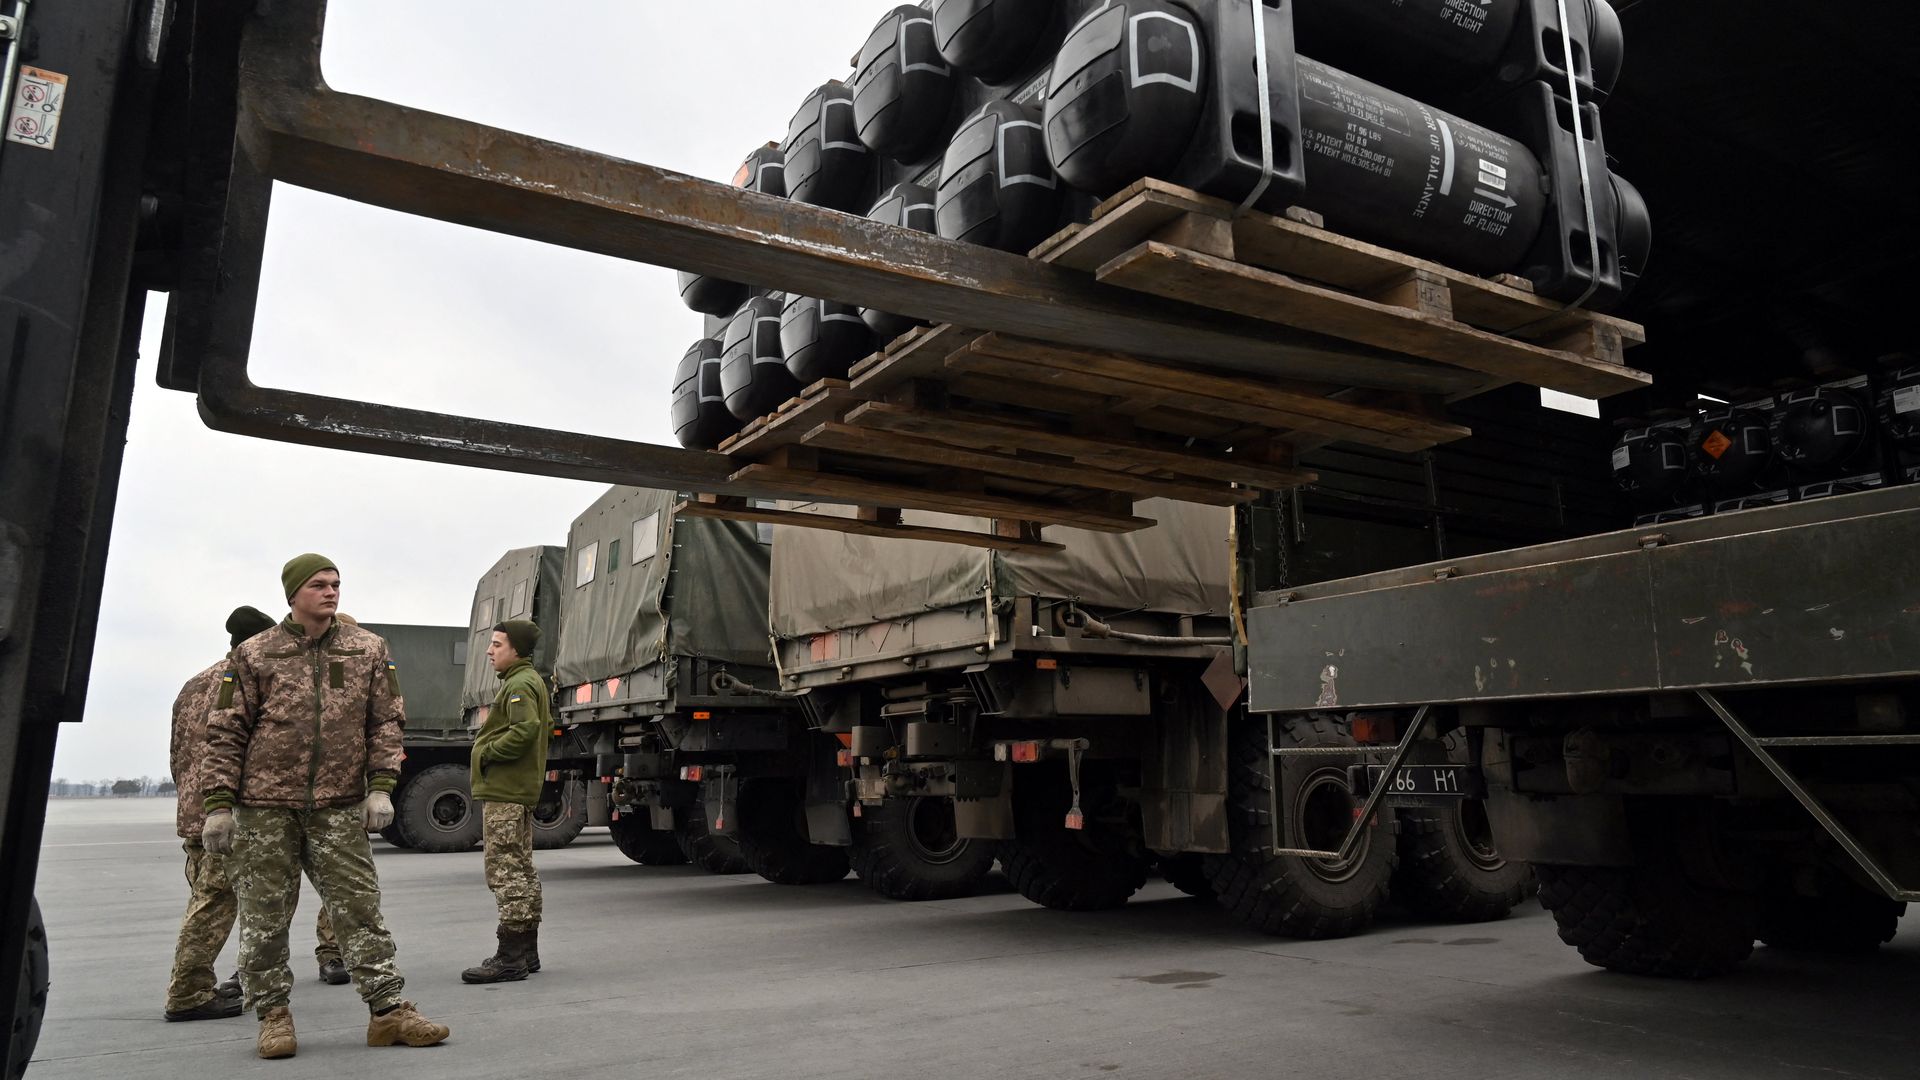 A pallet of Javelin anti-tank missiles is seen being loaded onto a truck in Ukraine.